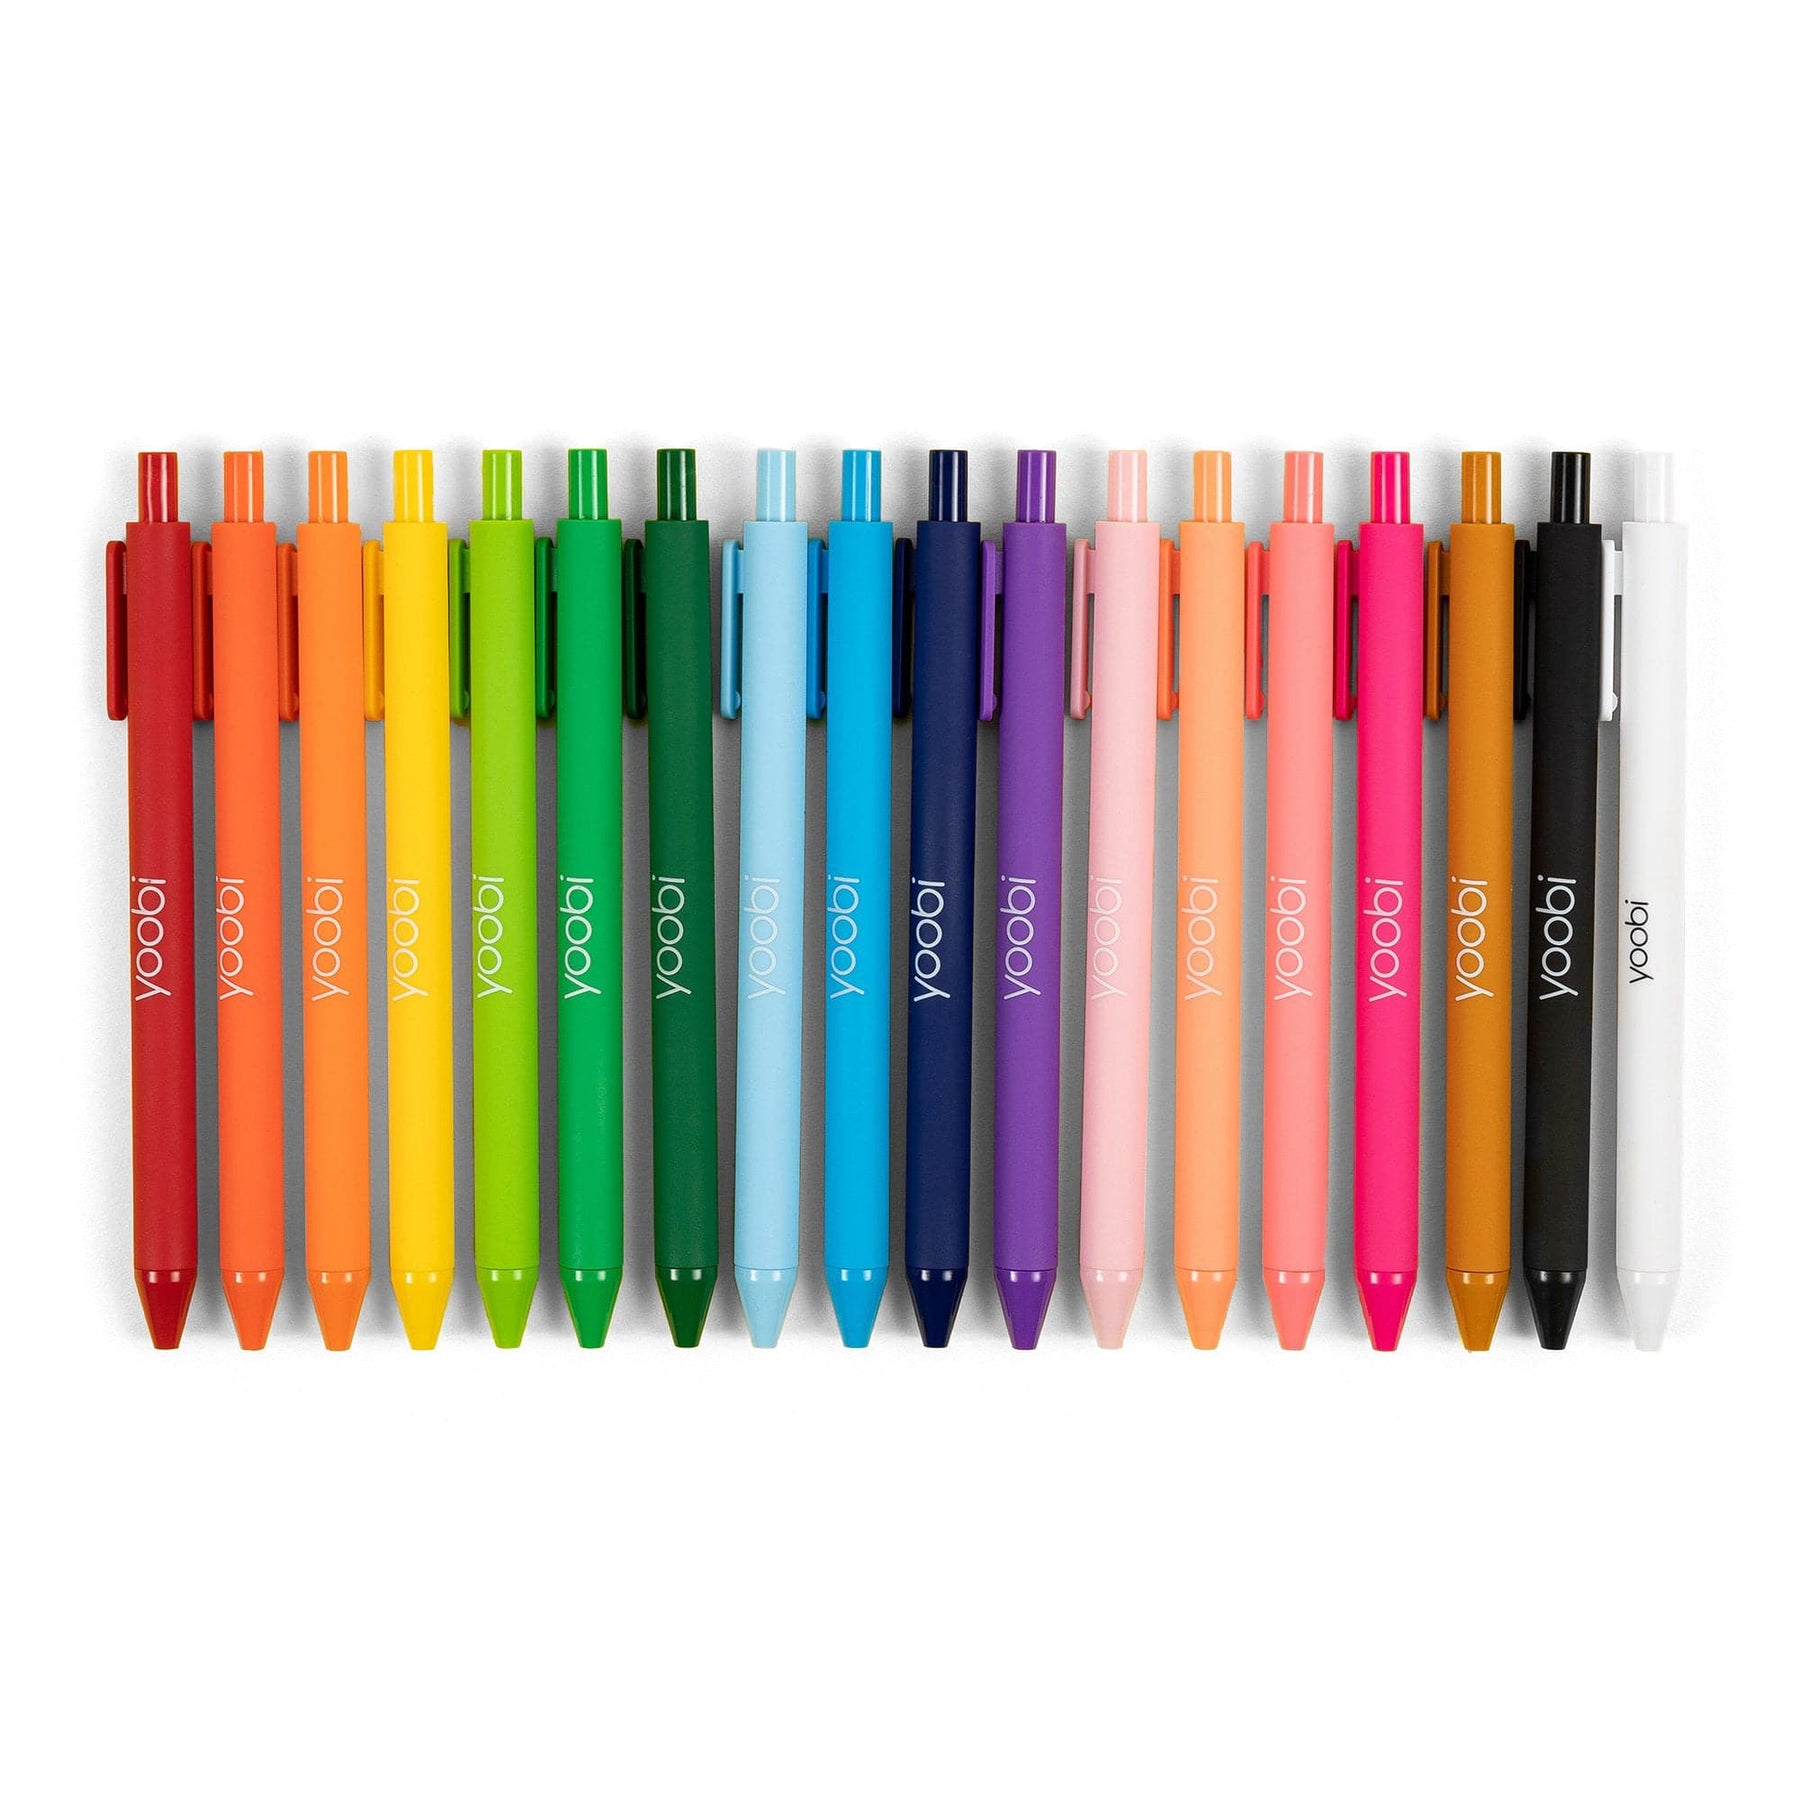 Yoobi Multicolor Pen Set - Clickable Ballpoint Pen with 8 Colors - Rainbow Color Pens for Kids - Smooth Writing Colored Pens - Cute School Supplies